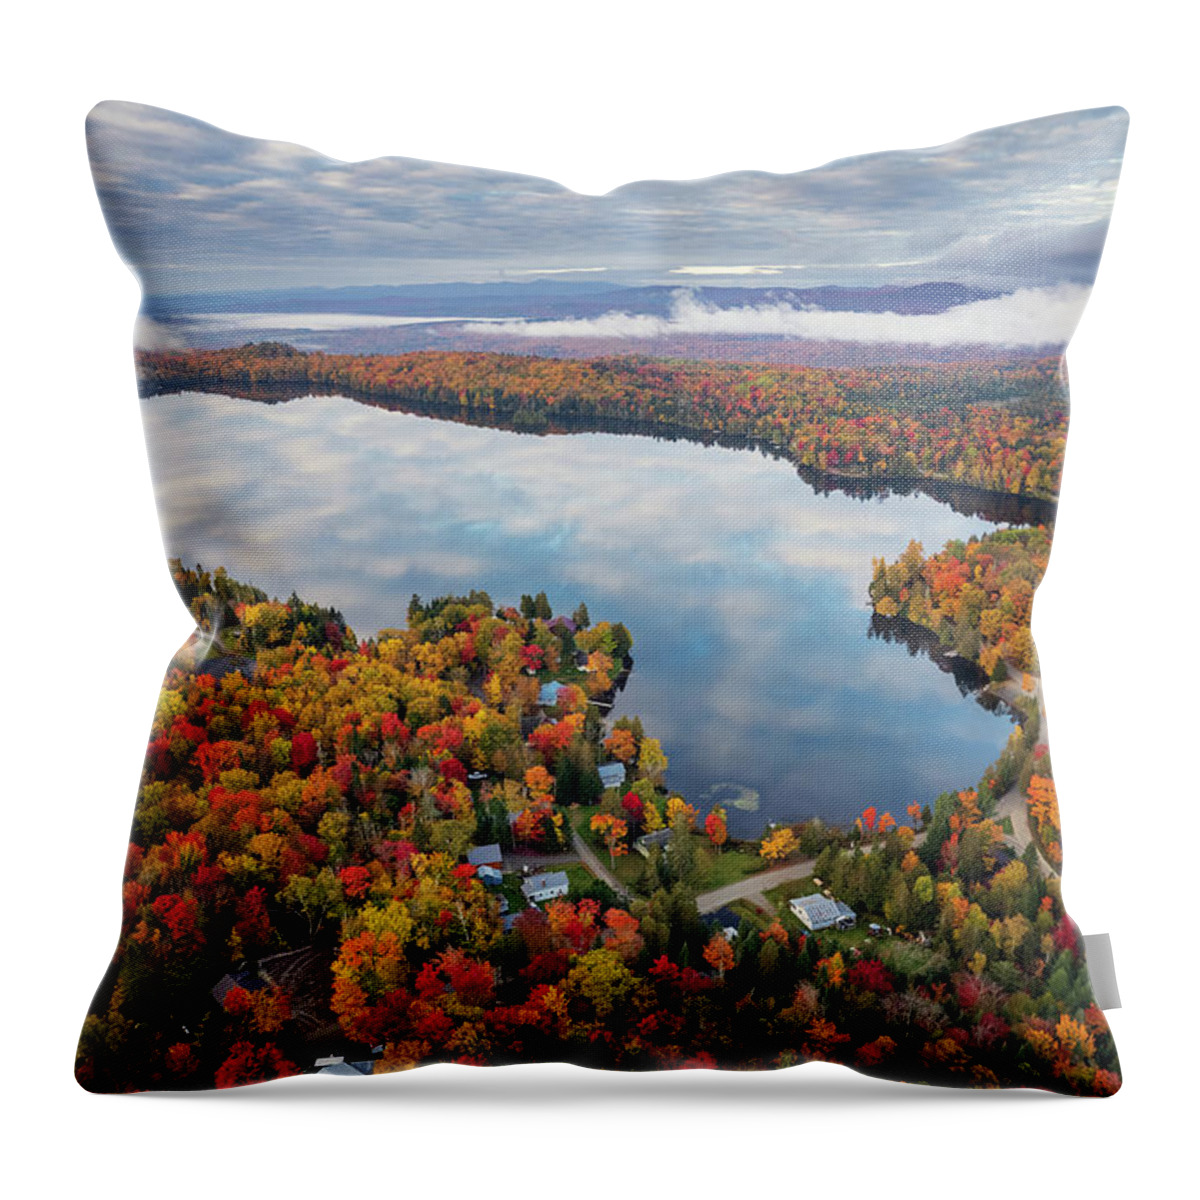  Throw Pillow featuring the photograph Newark Pond Vermont Fall Reflection #3 by John Rowe